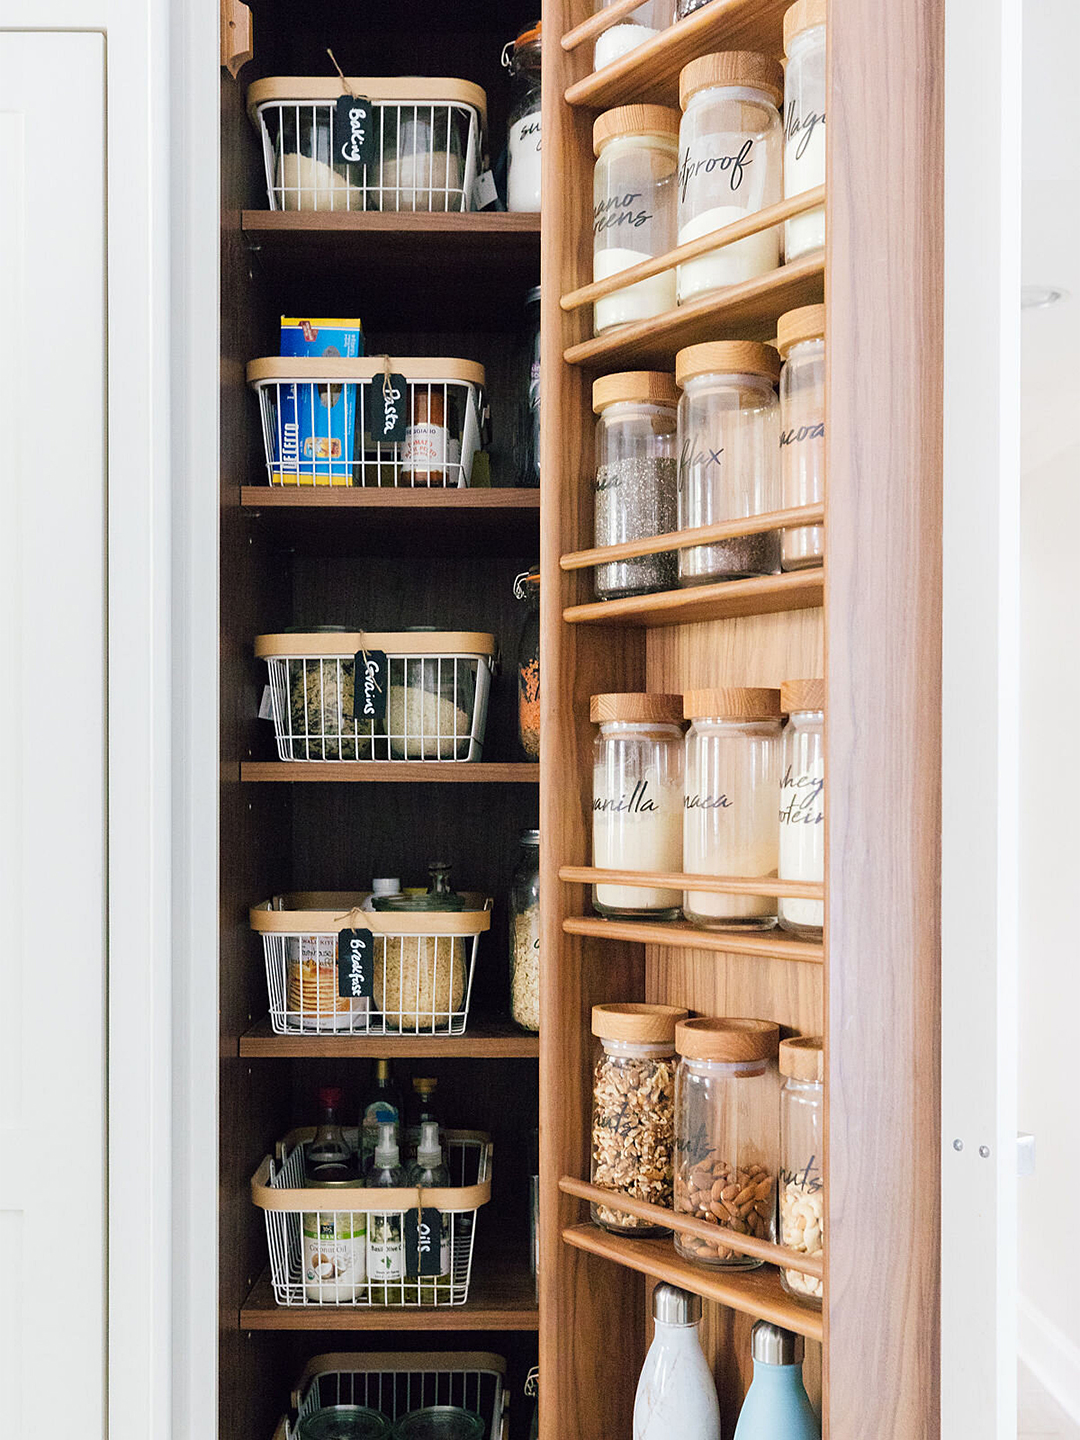 6 Helpful Tips for Small Pantry Organization You Can Maintain